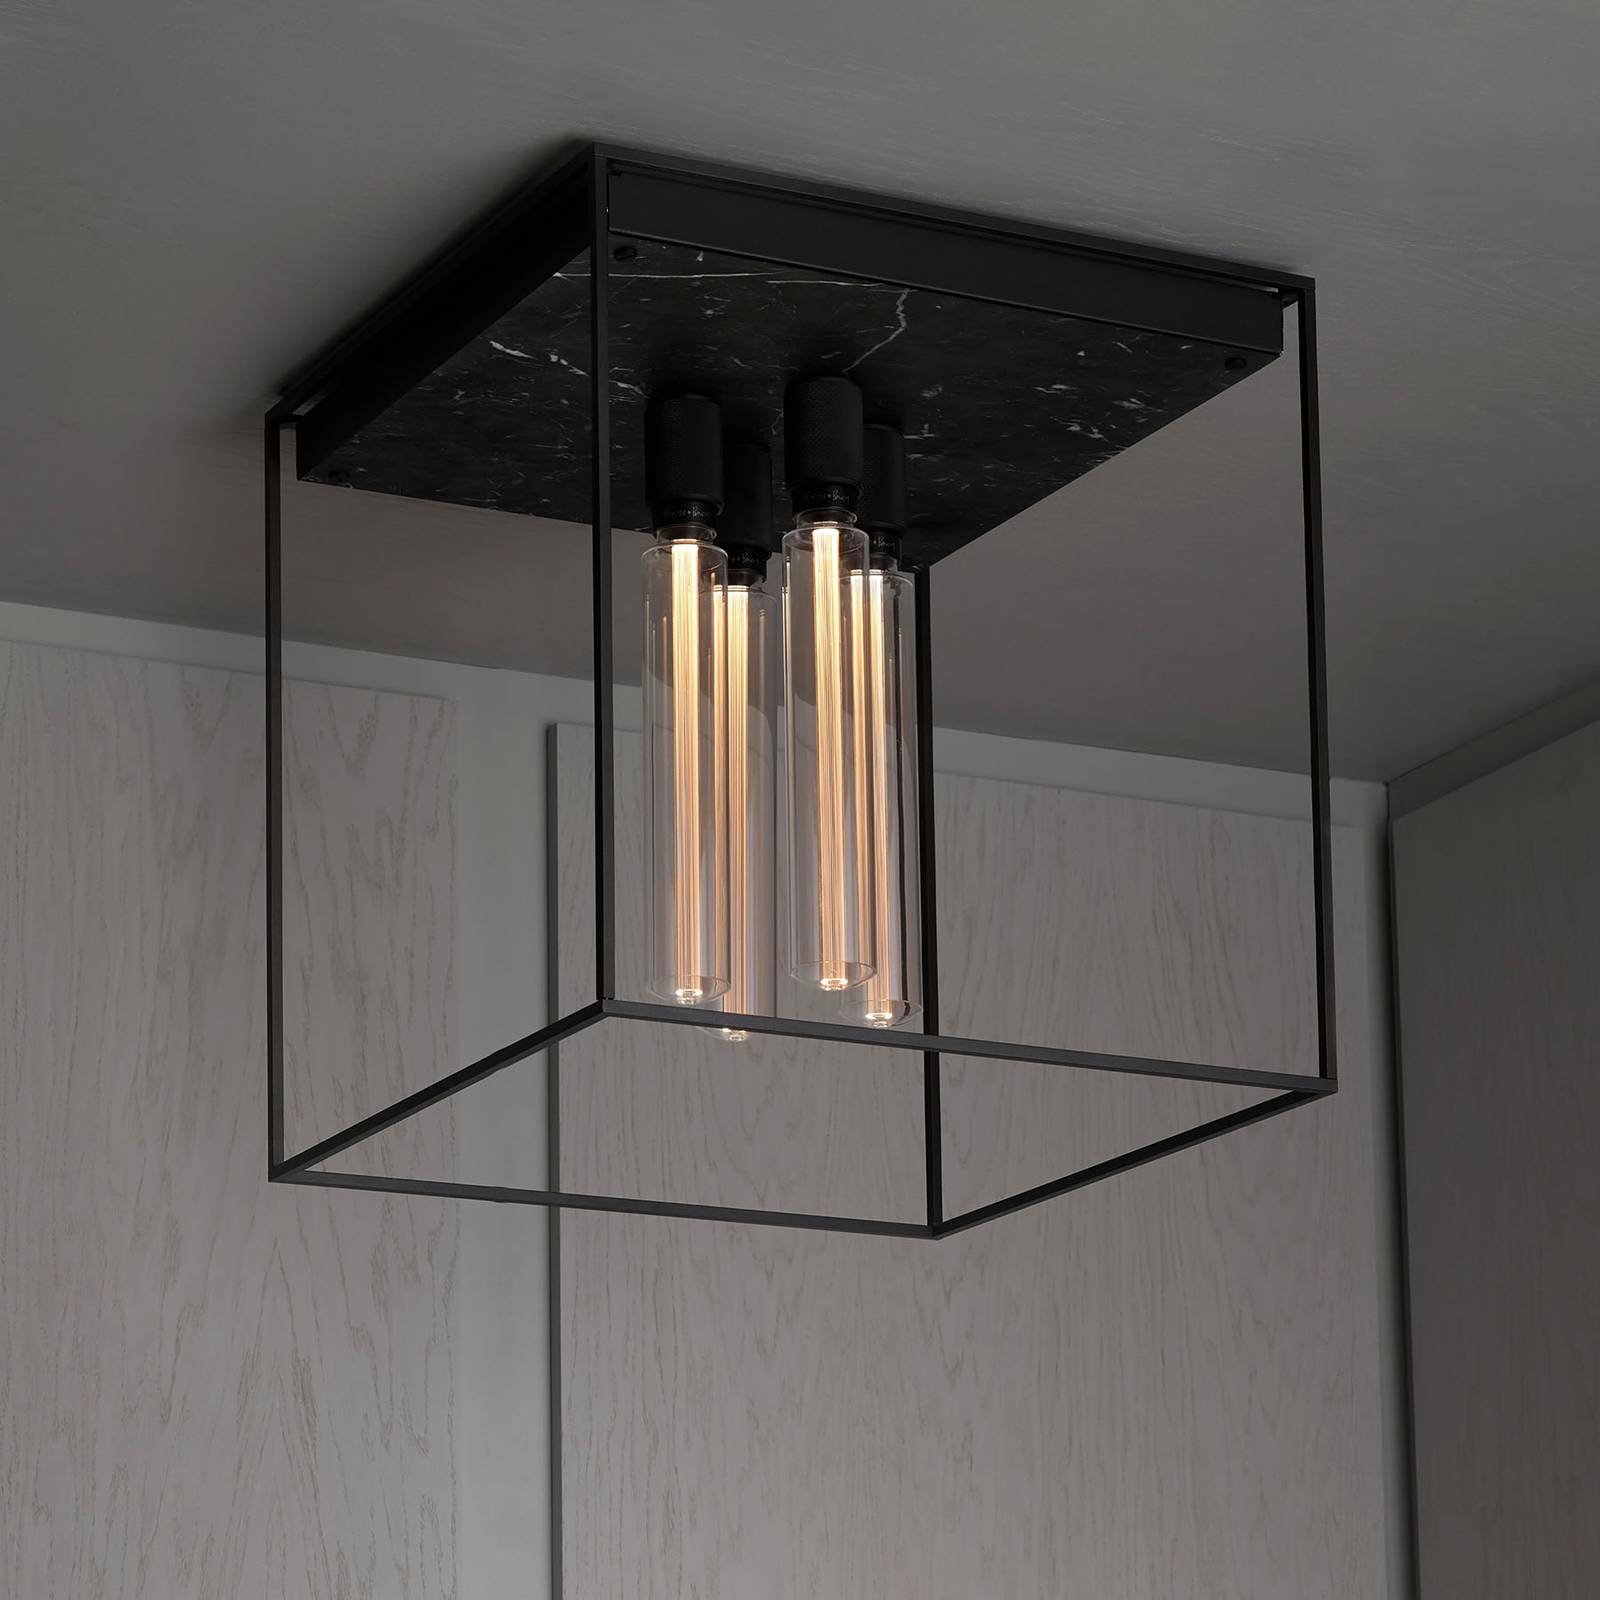 Image of Buster + Punch Caged Ceiling 4.0 LED marbre noir 5060603613828